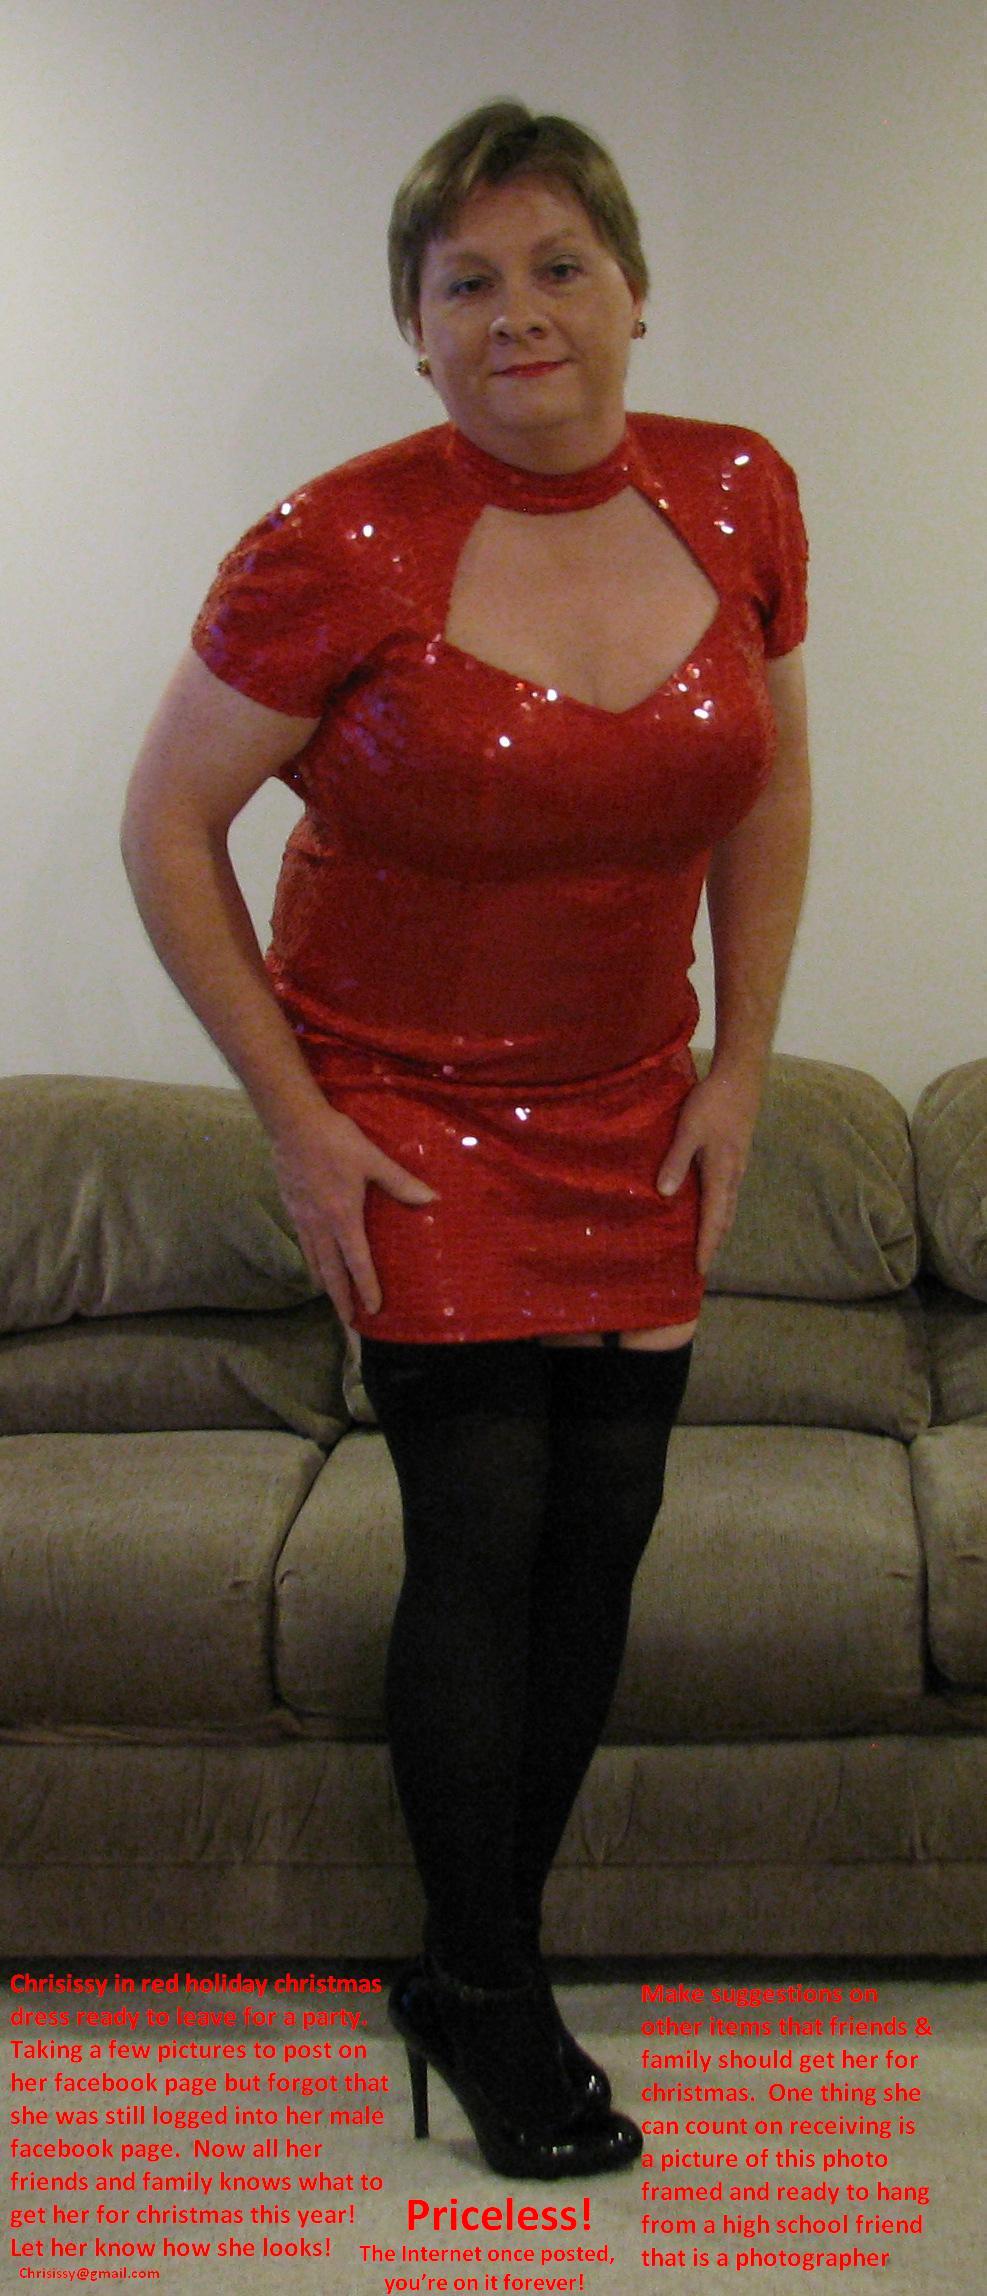 Having a picture of you dressed in your sexy red holiday Christmas party mini dress accidentally posted to your male facebook profile for all your friends and family to see instead of your feminine facebook profile! Priceless!